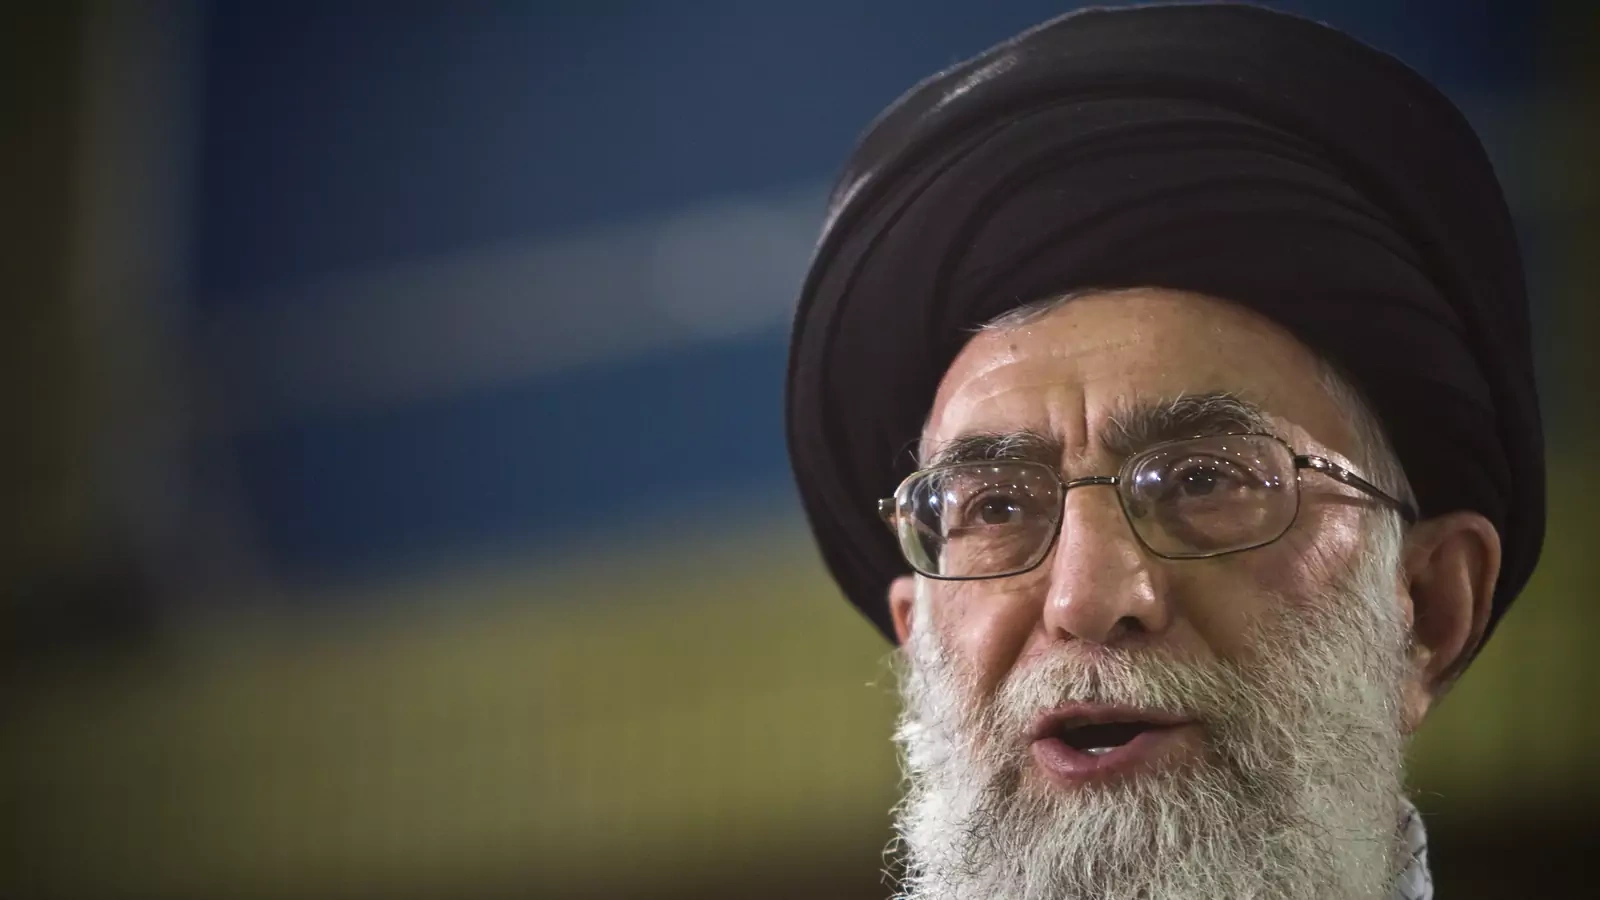 Ayatollah Ali Khamenei, Iran’s supreme leader, is the second-longest-serving head of state in the Middle East.